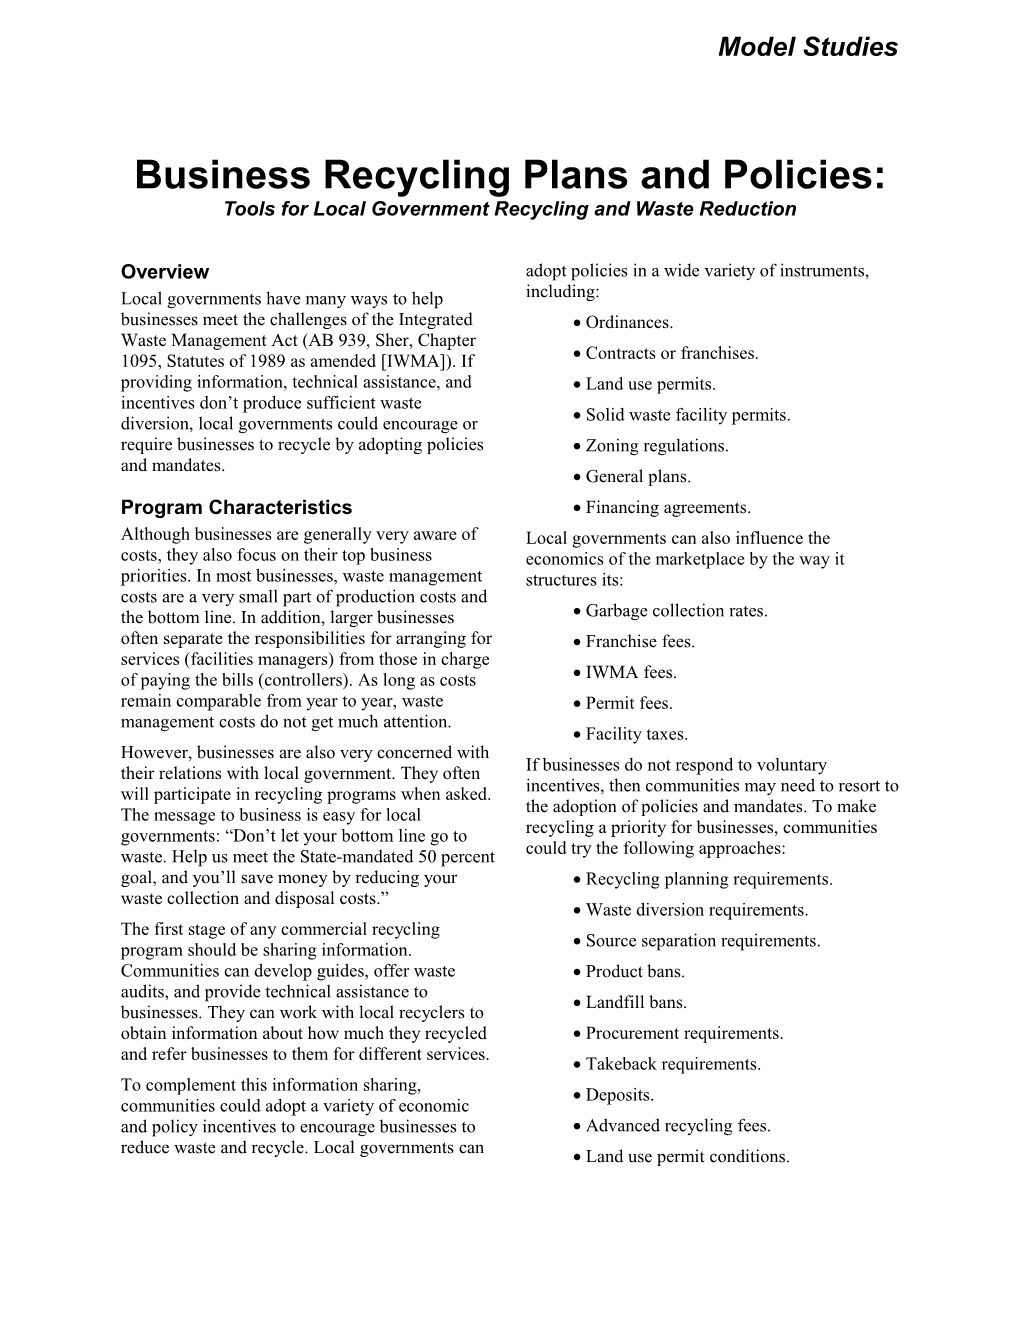 Business Recycling Plans & Policies: Tools for Local Government Recycling and Waste Reduction s1